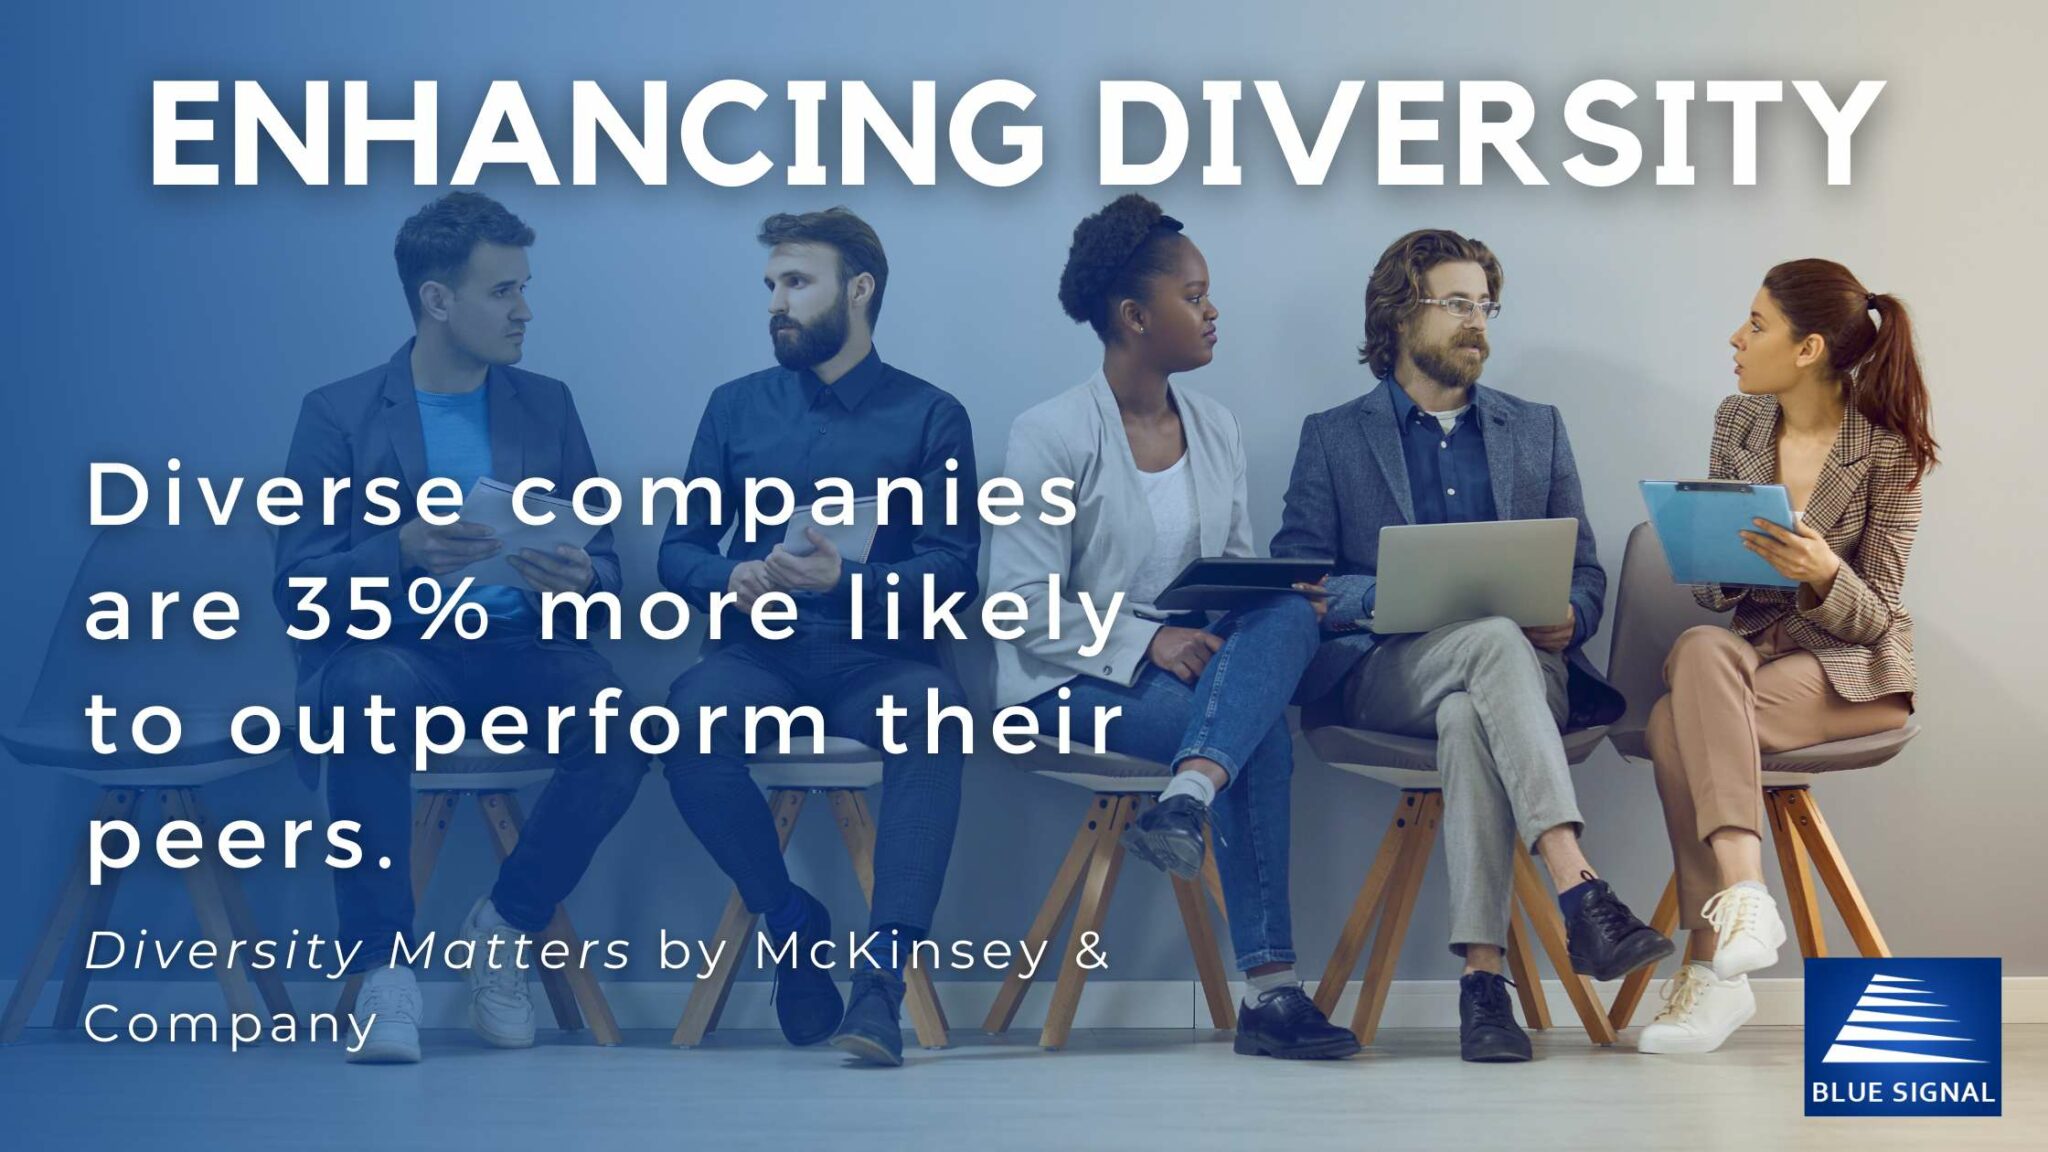 Image of 5 job applicants waiting to interview with a text overlay. Text states "Diverse companies are 35% more likely to outperform their peers - Diversity Matters by McKinsey & Company"